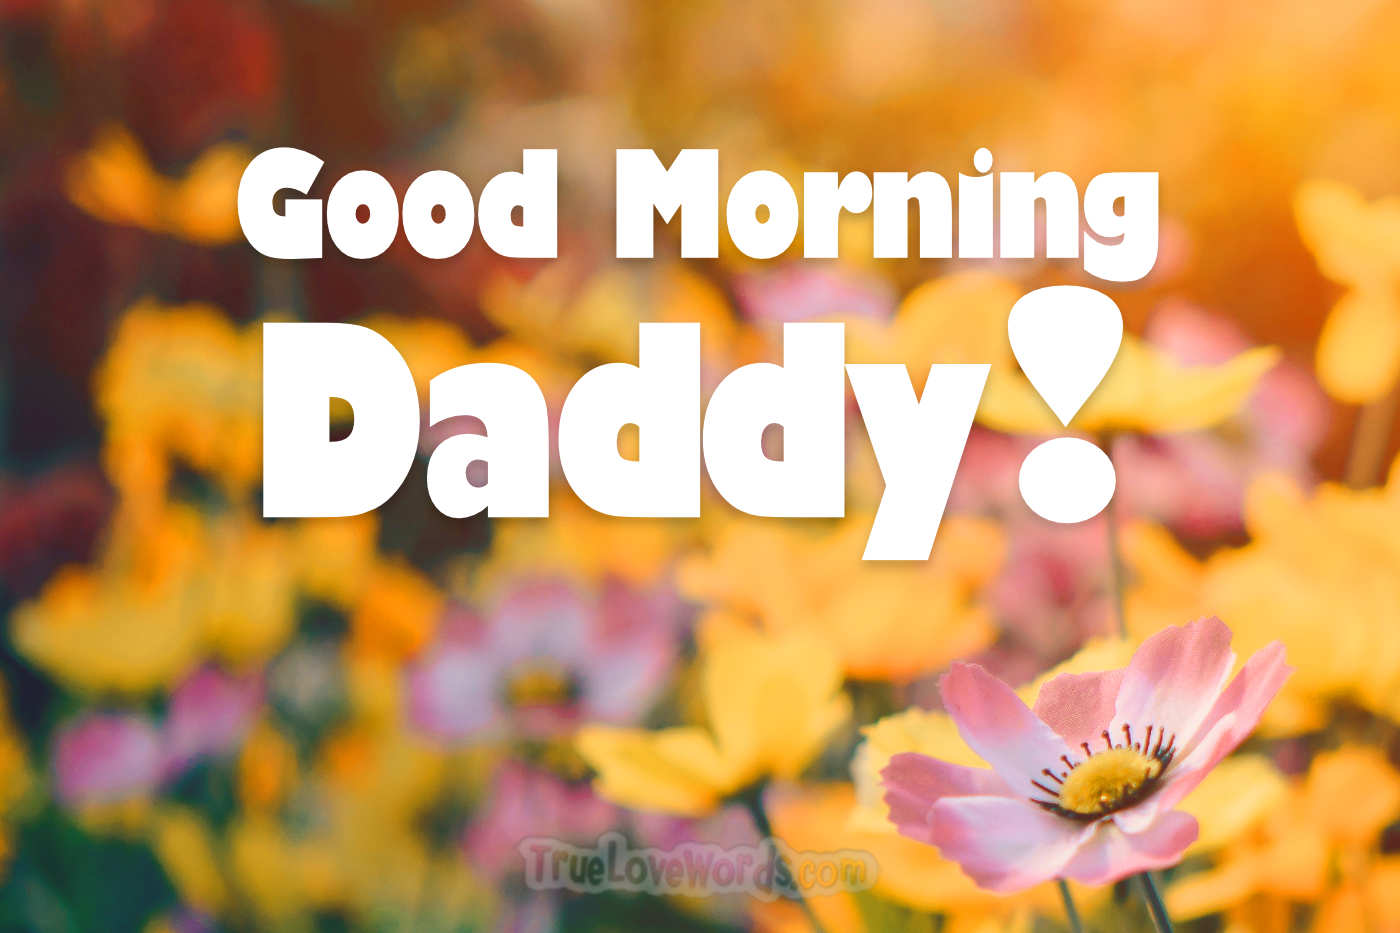 Good Morning Messages for Dad » True Love Words